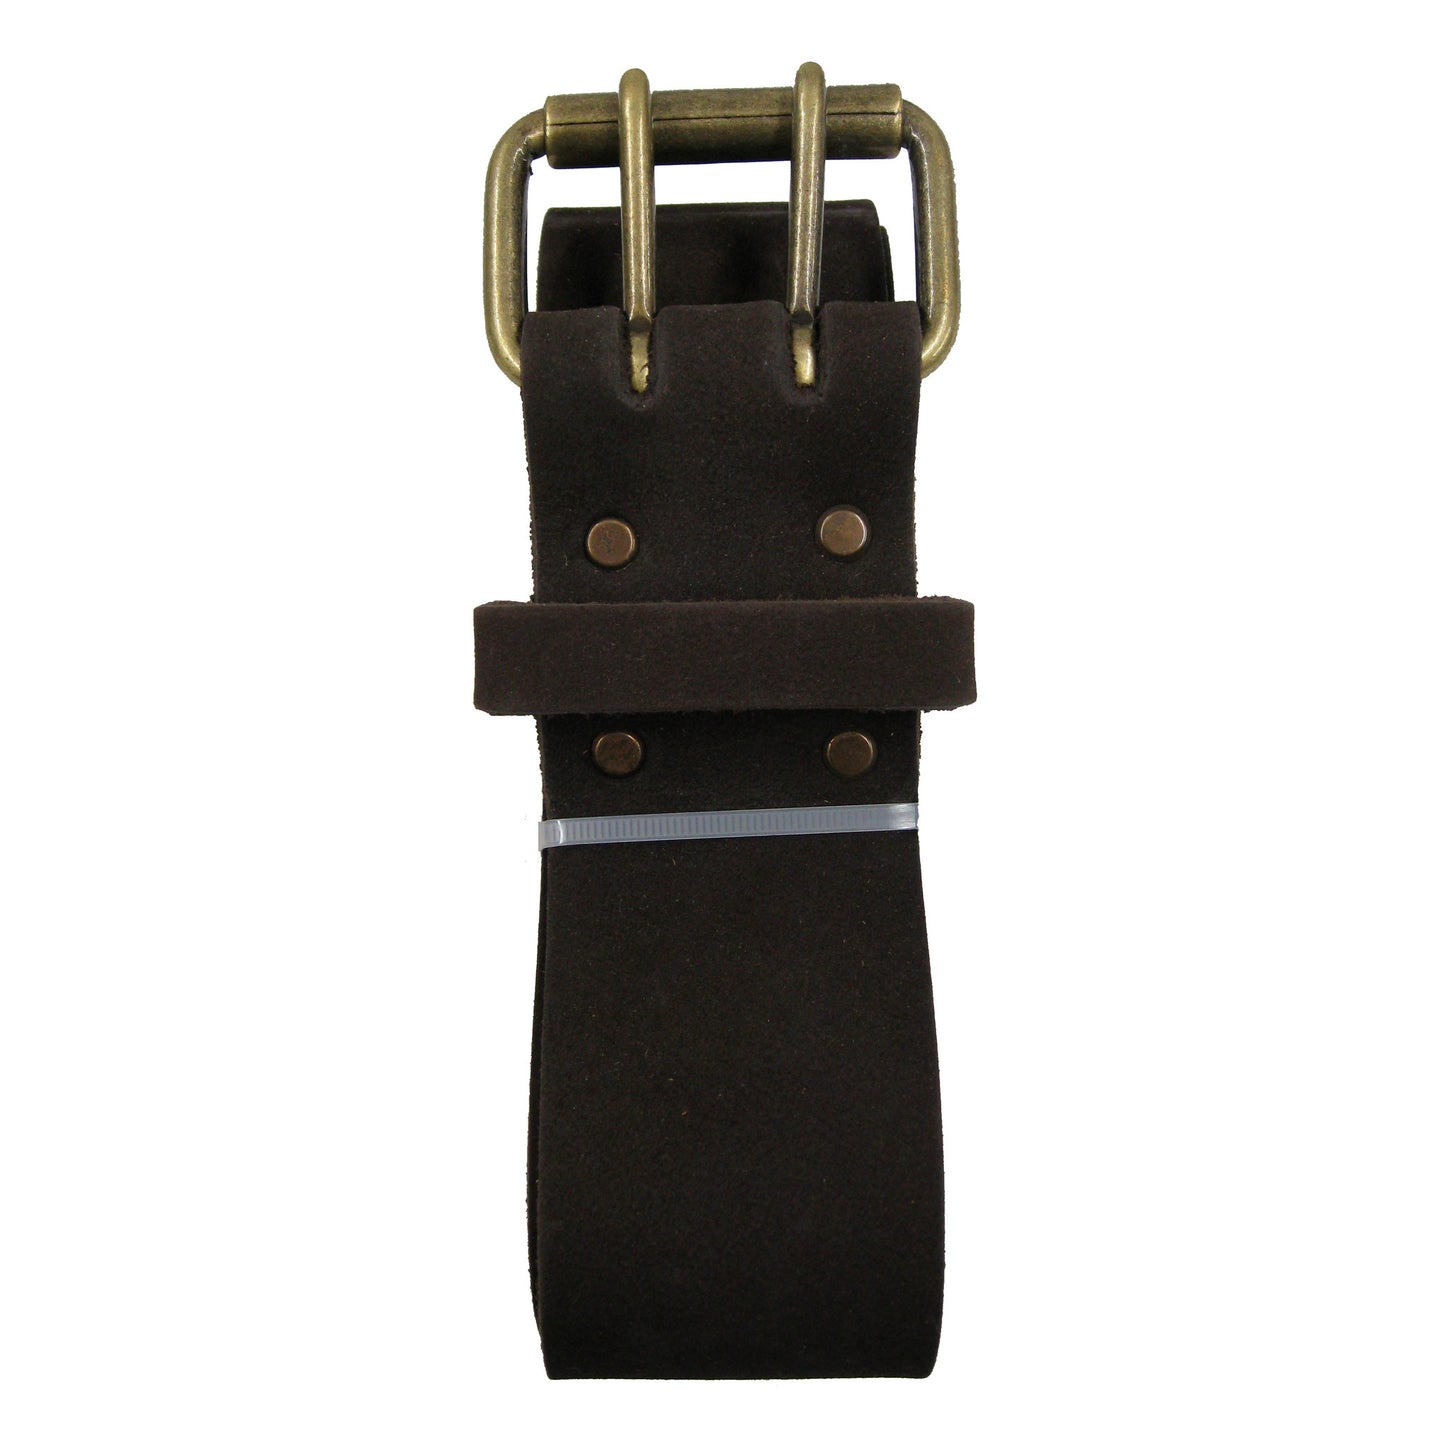 Style n Craft's 74052 - 2 Inch Wide Work Belt in Heavy Top Grain Oiled Leather in Dark Brown Color with Double Prong Metal Roller Buckle - Folded View